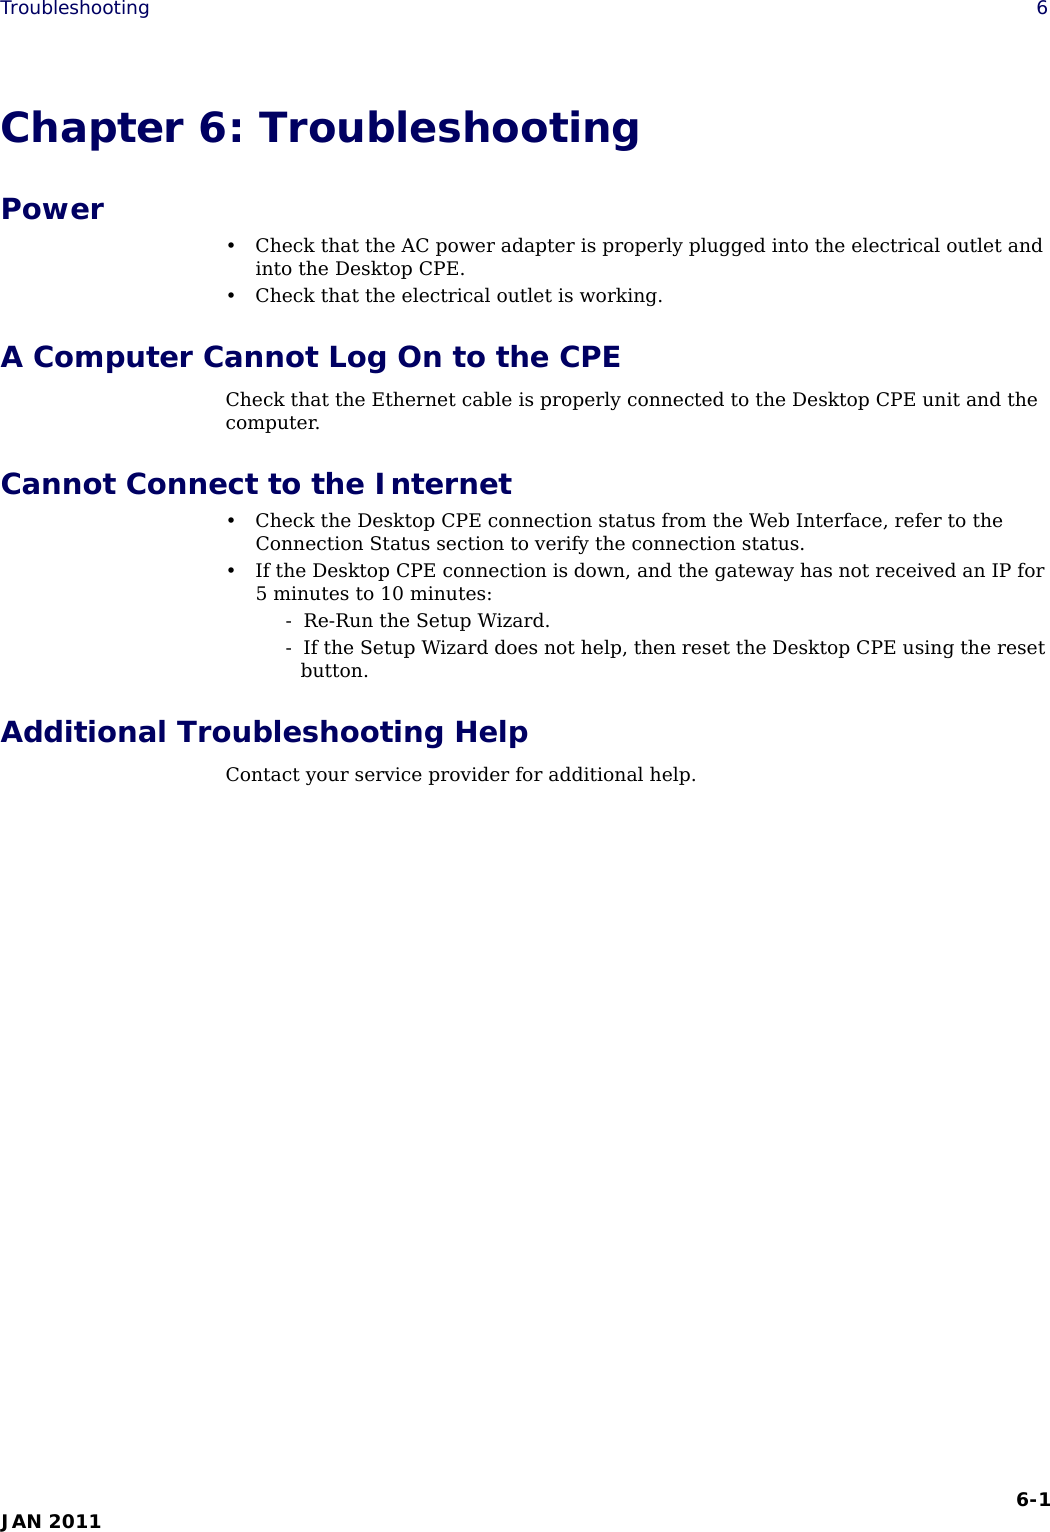 Page 52 of Nokia Solutions and Networks CPE25890 WiMAX CPE User Manual CPEi 890 UM Generic v1 2